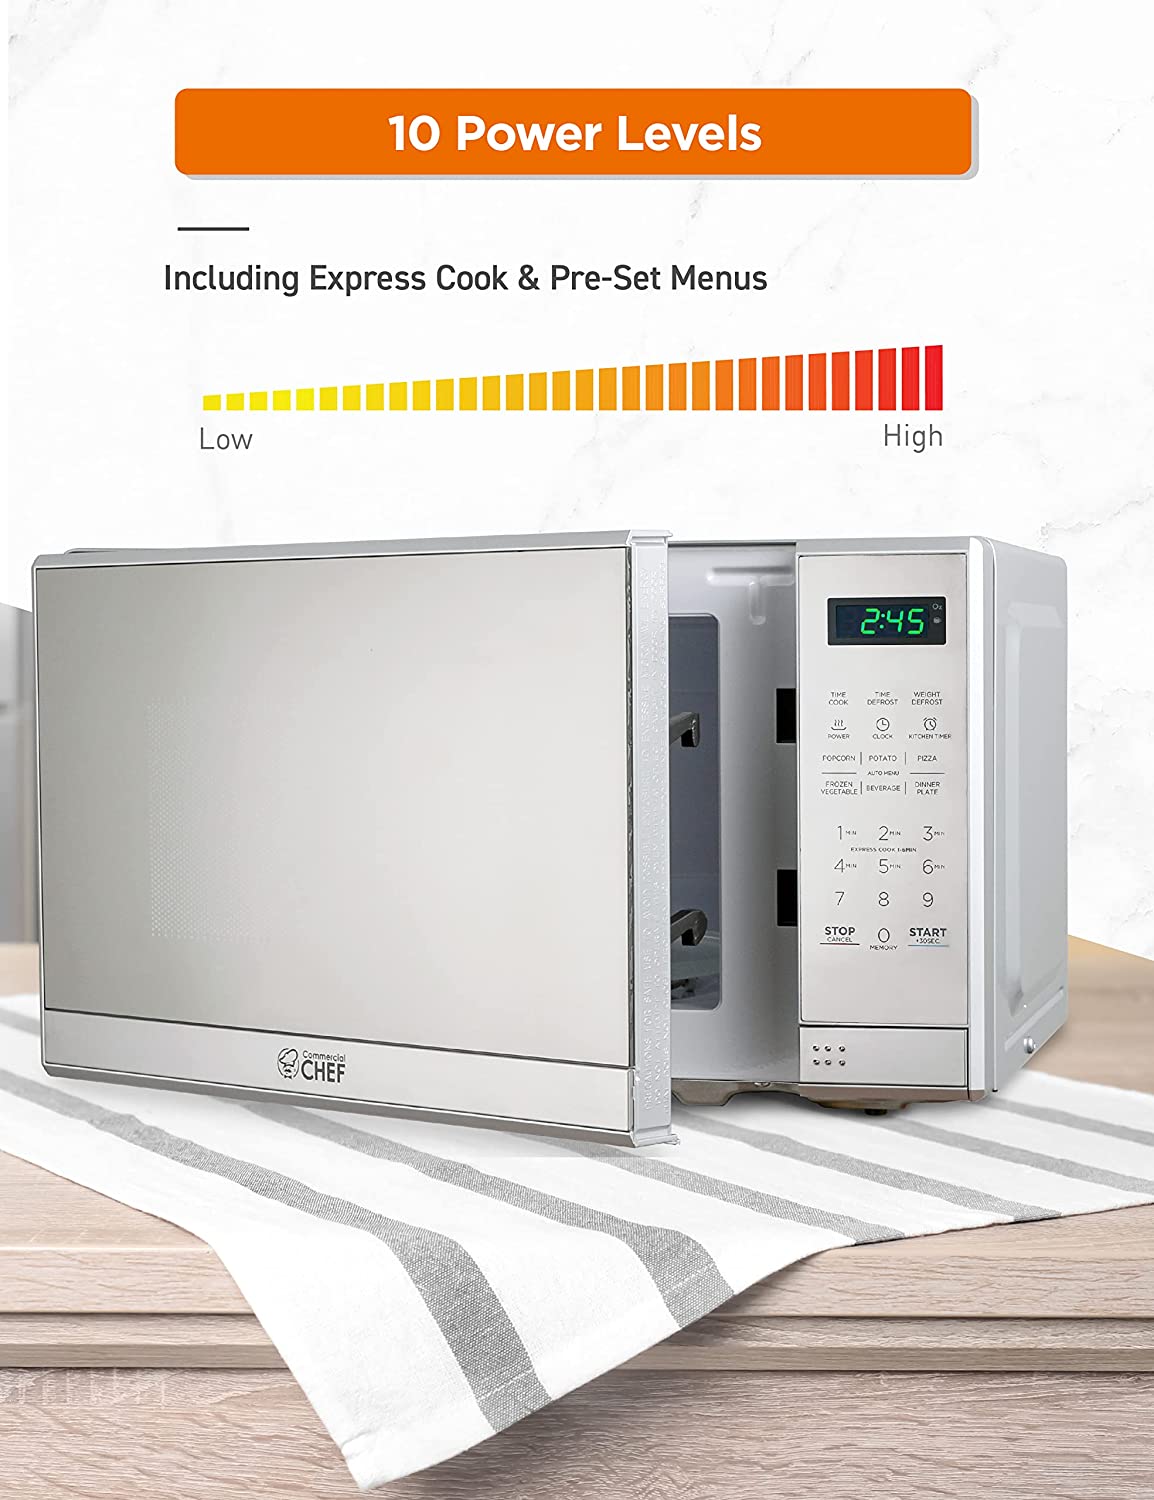 https://bigbigmart.com/wp-content/uploads/2023/07/COMMERCIAL-CHEF-Small-Microwave-0.7-Cu.-Ft.-Countertop-Microwave-with-Digital-Display-Stainless-Steel-Microwave-with-10-Power-Levels-Outstanding-Portable-Microwave-with-Convenient-Push-Button2.jpg